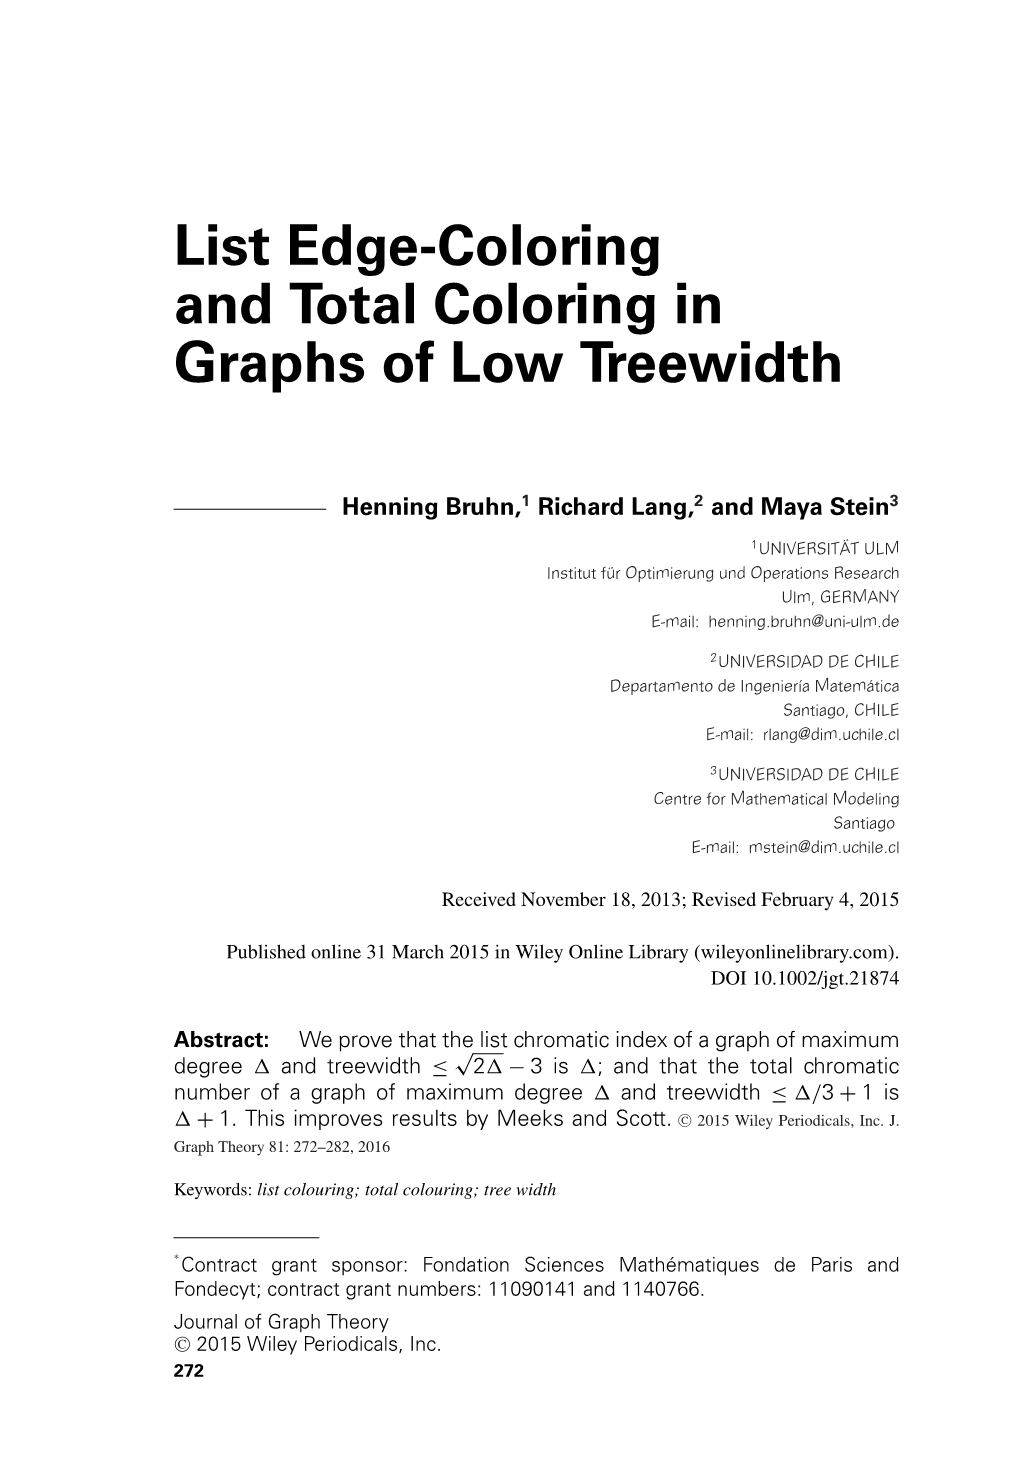 Coloring and Total Coloring in Graphs of Low Treewidth